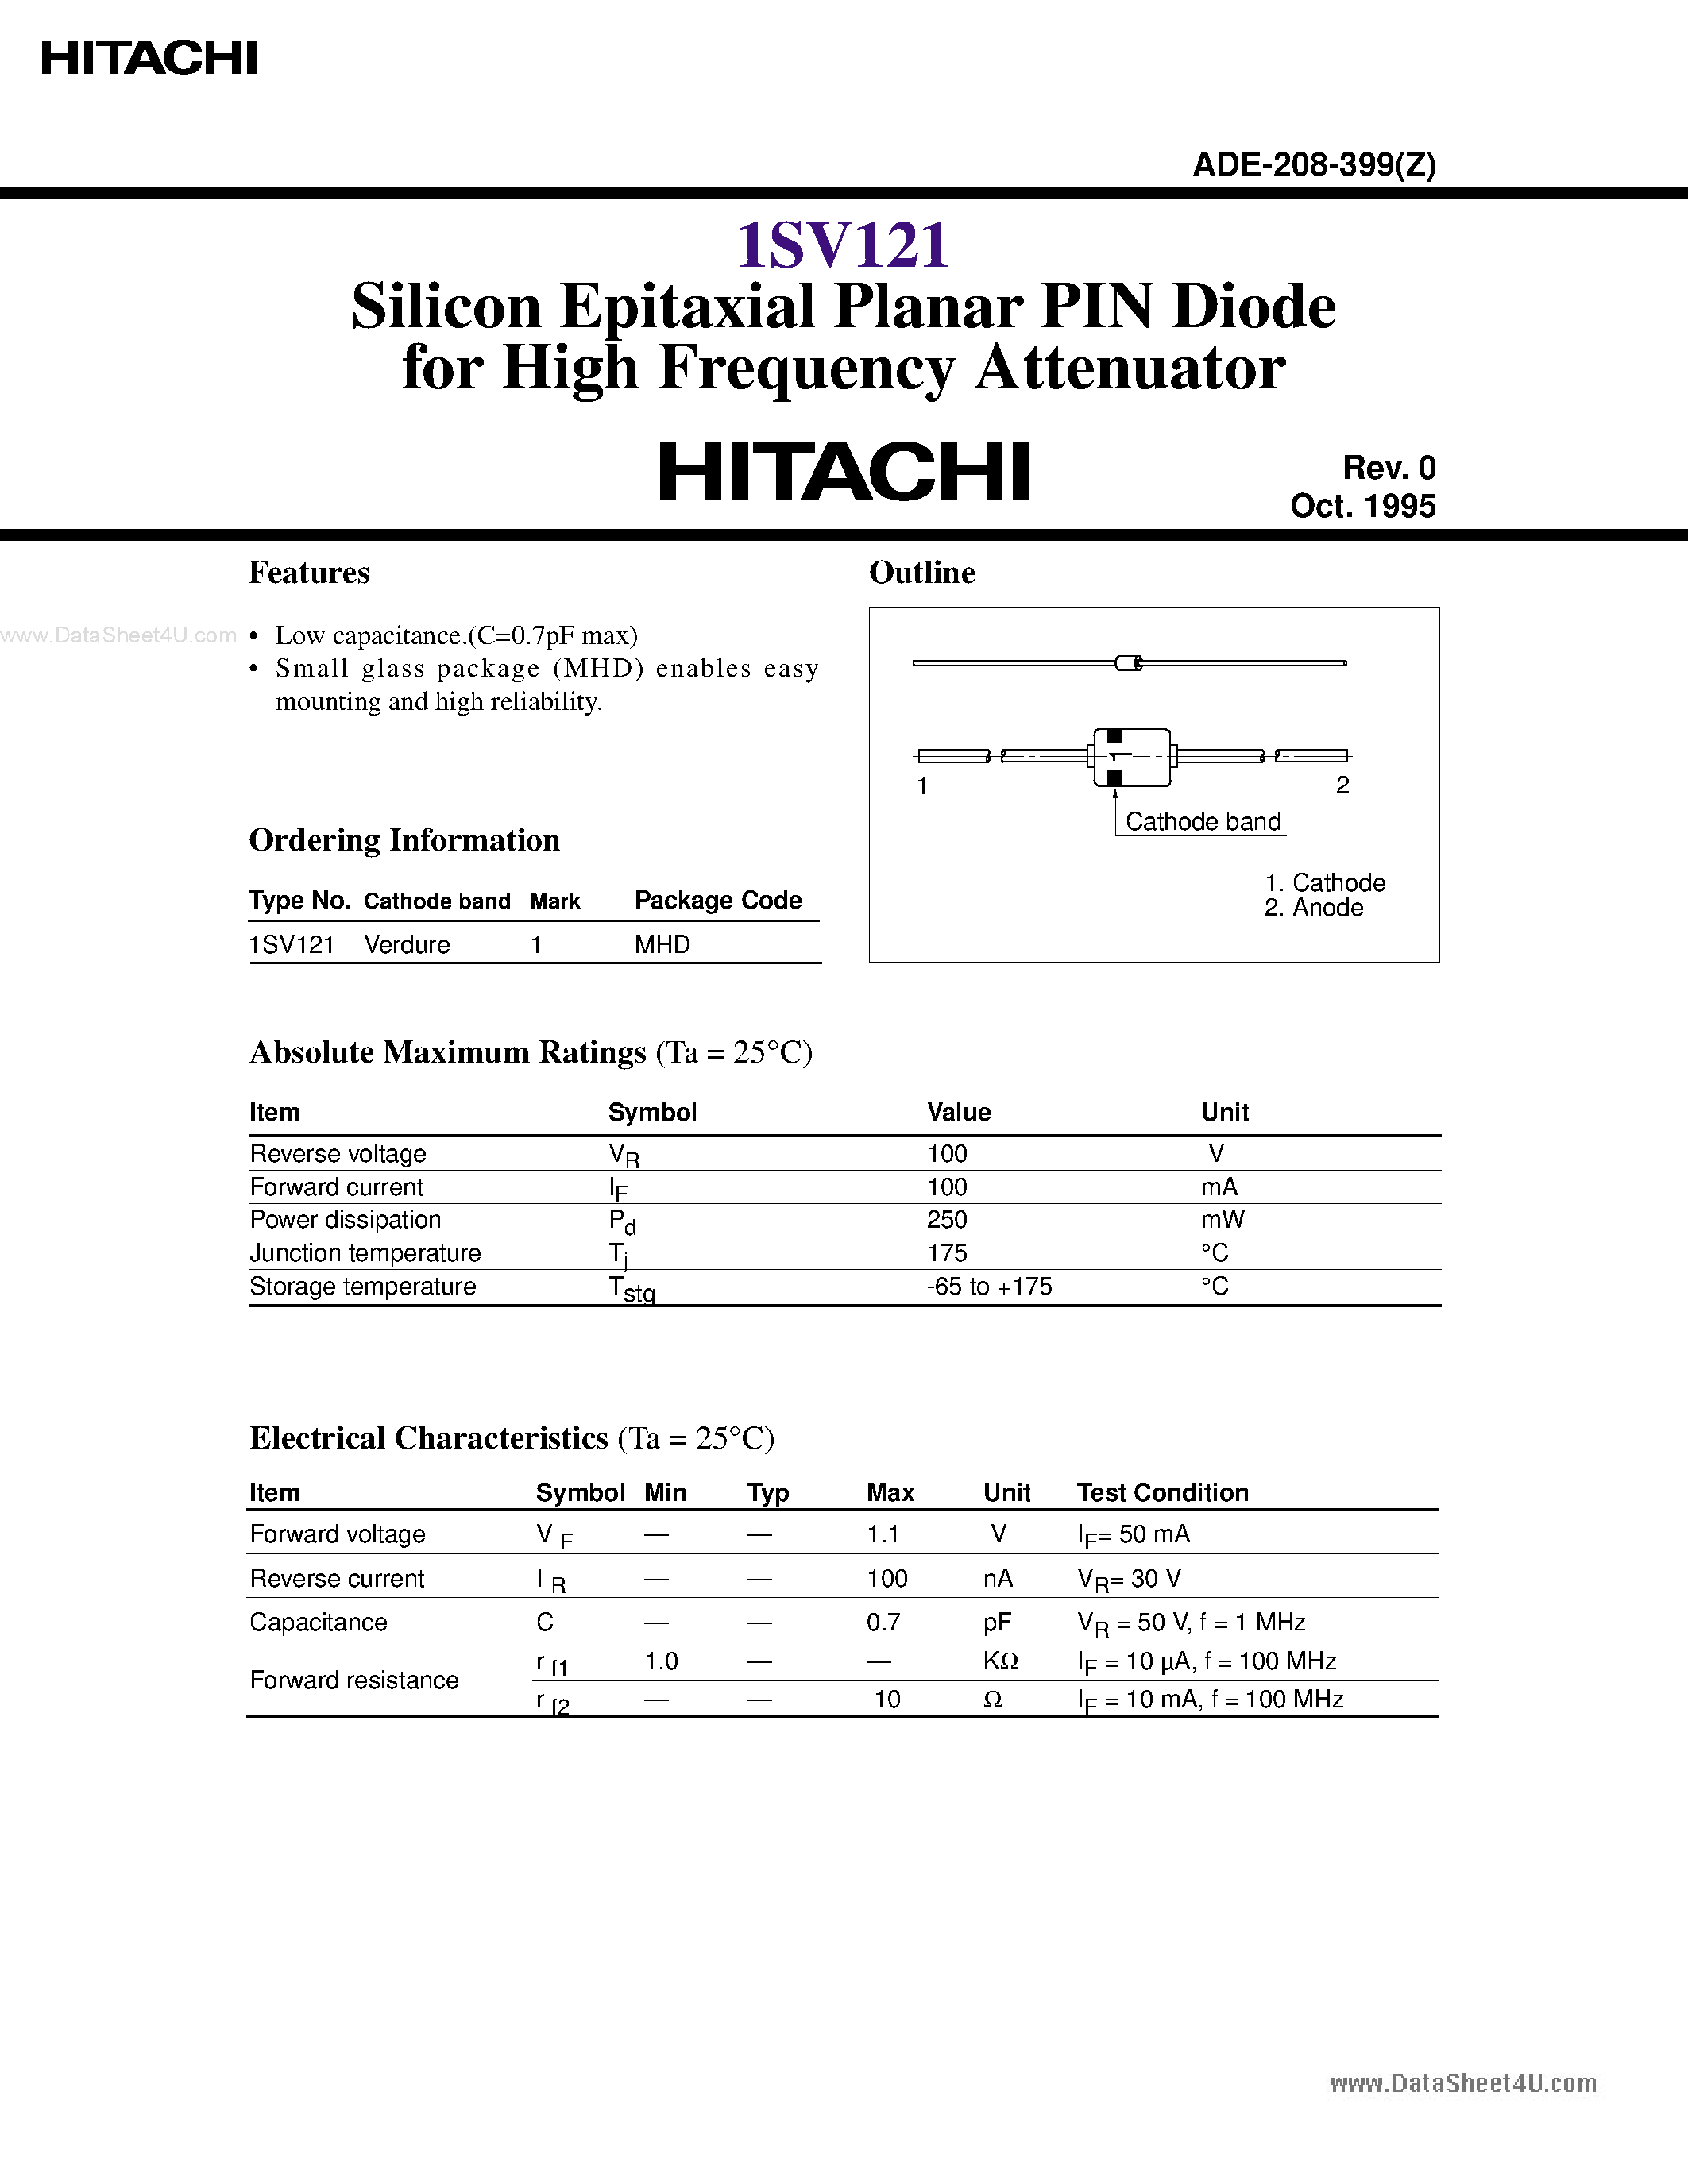 Datasheet 1SV121 - Silicon Epitaxial Planar PIN Diode page 1